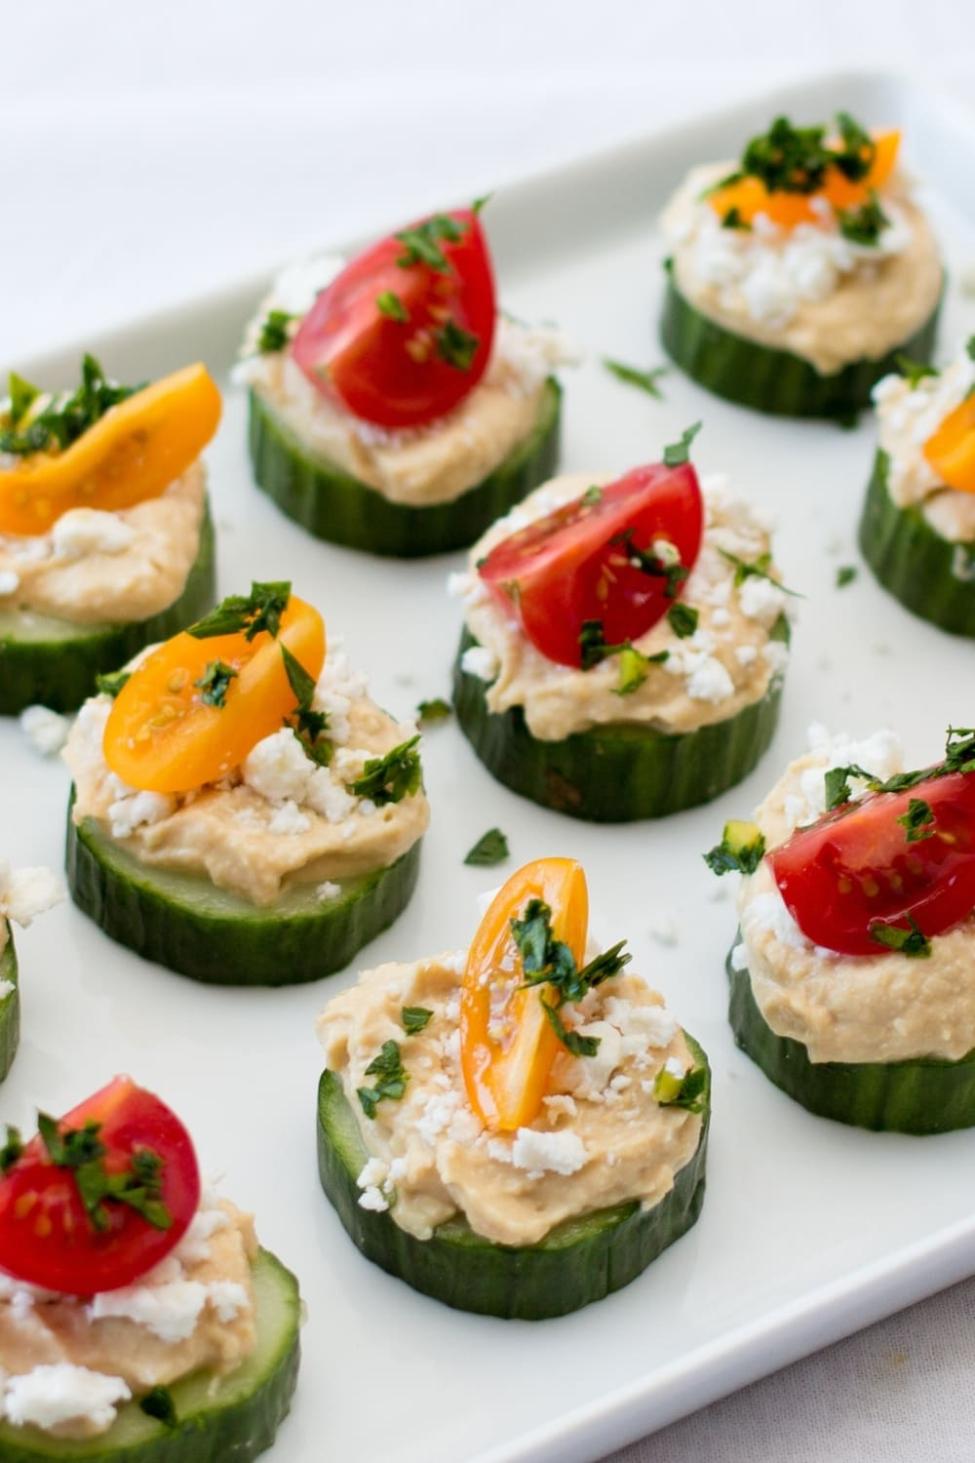 Appetizers as a Reflection of Culinary Expertise: Showcasing Your Skills and Creativity